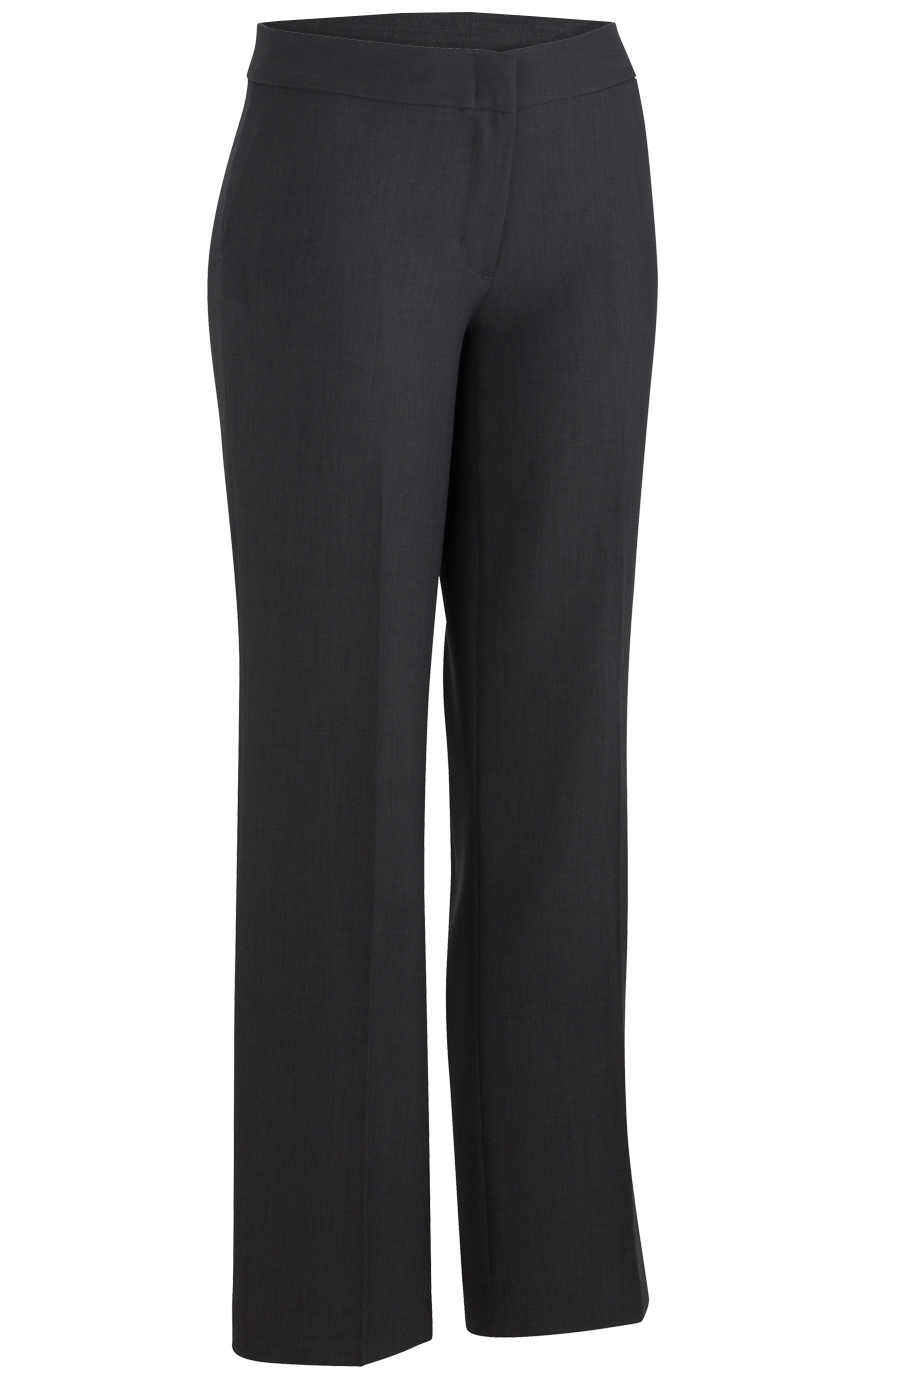 Buy online Black Flat Front Full Length Trouser from bottom wear for Women  by Broadstar for ₹849 at 72% off | 2024 Limeroad.com